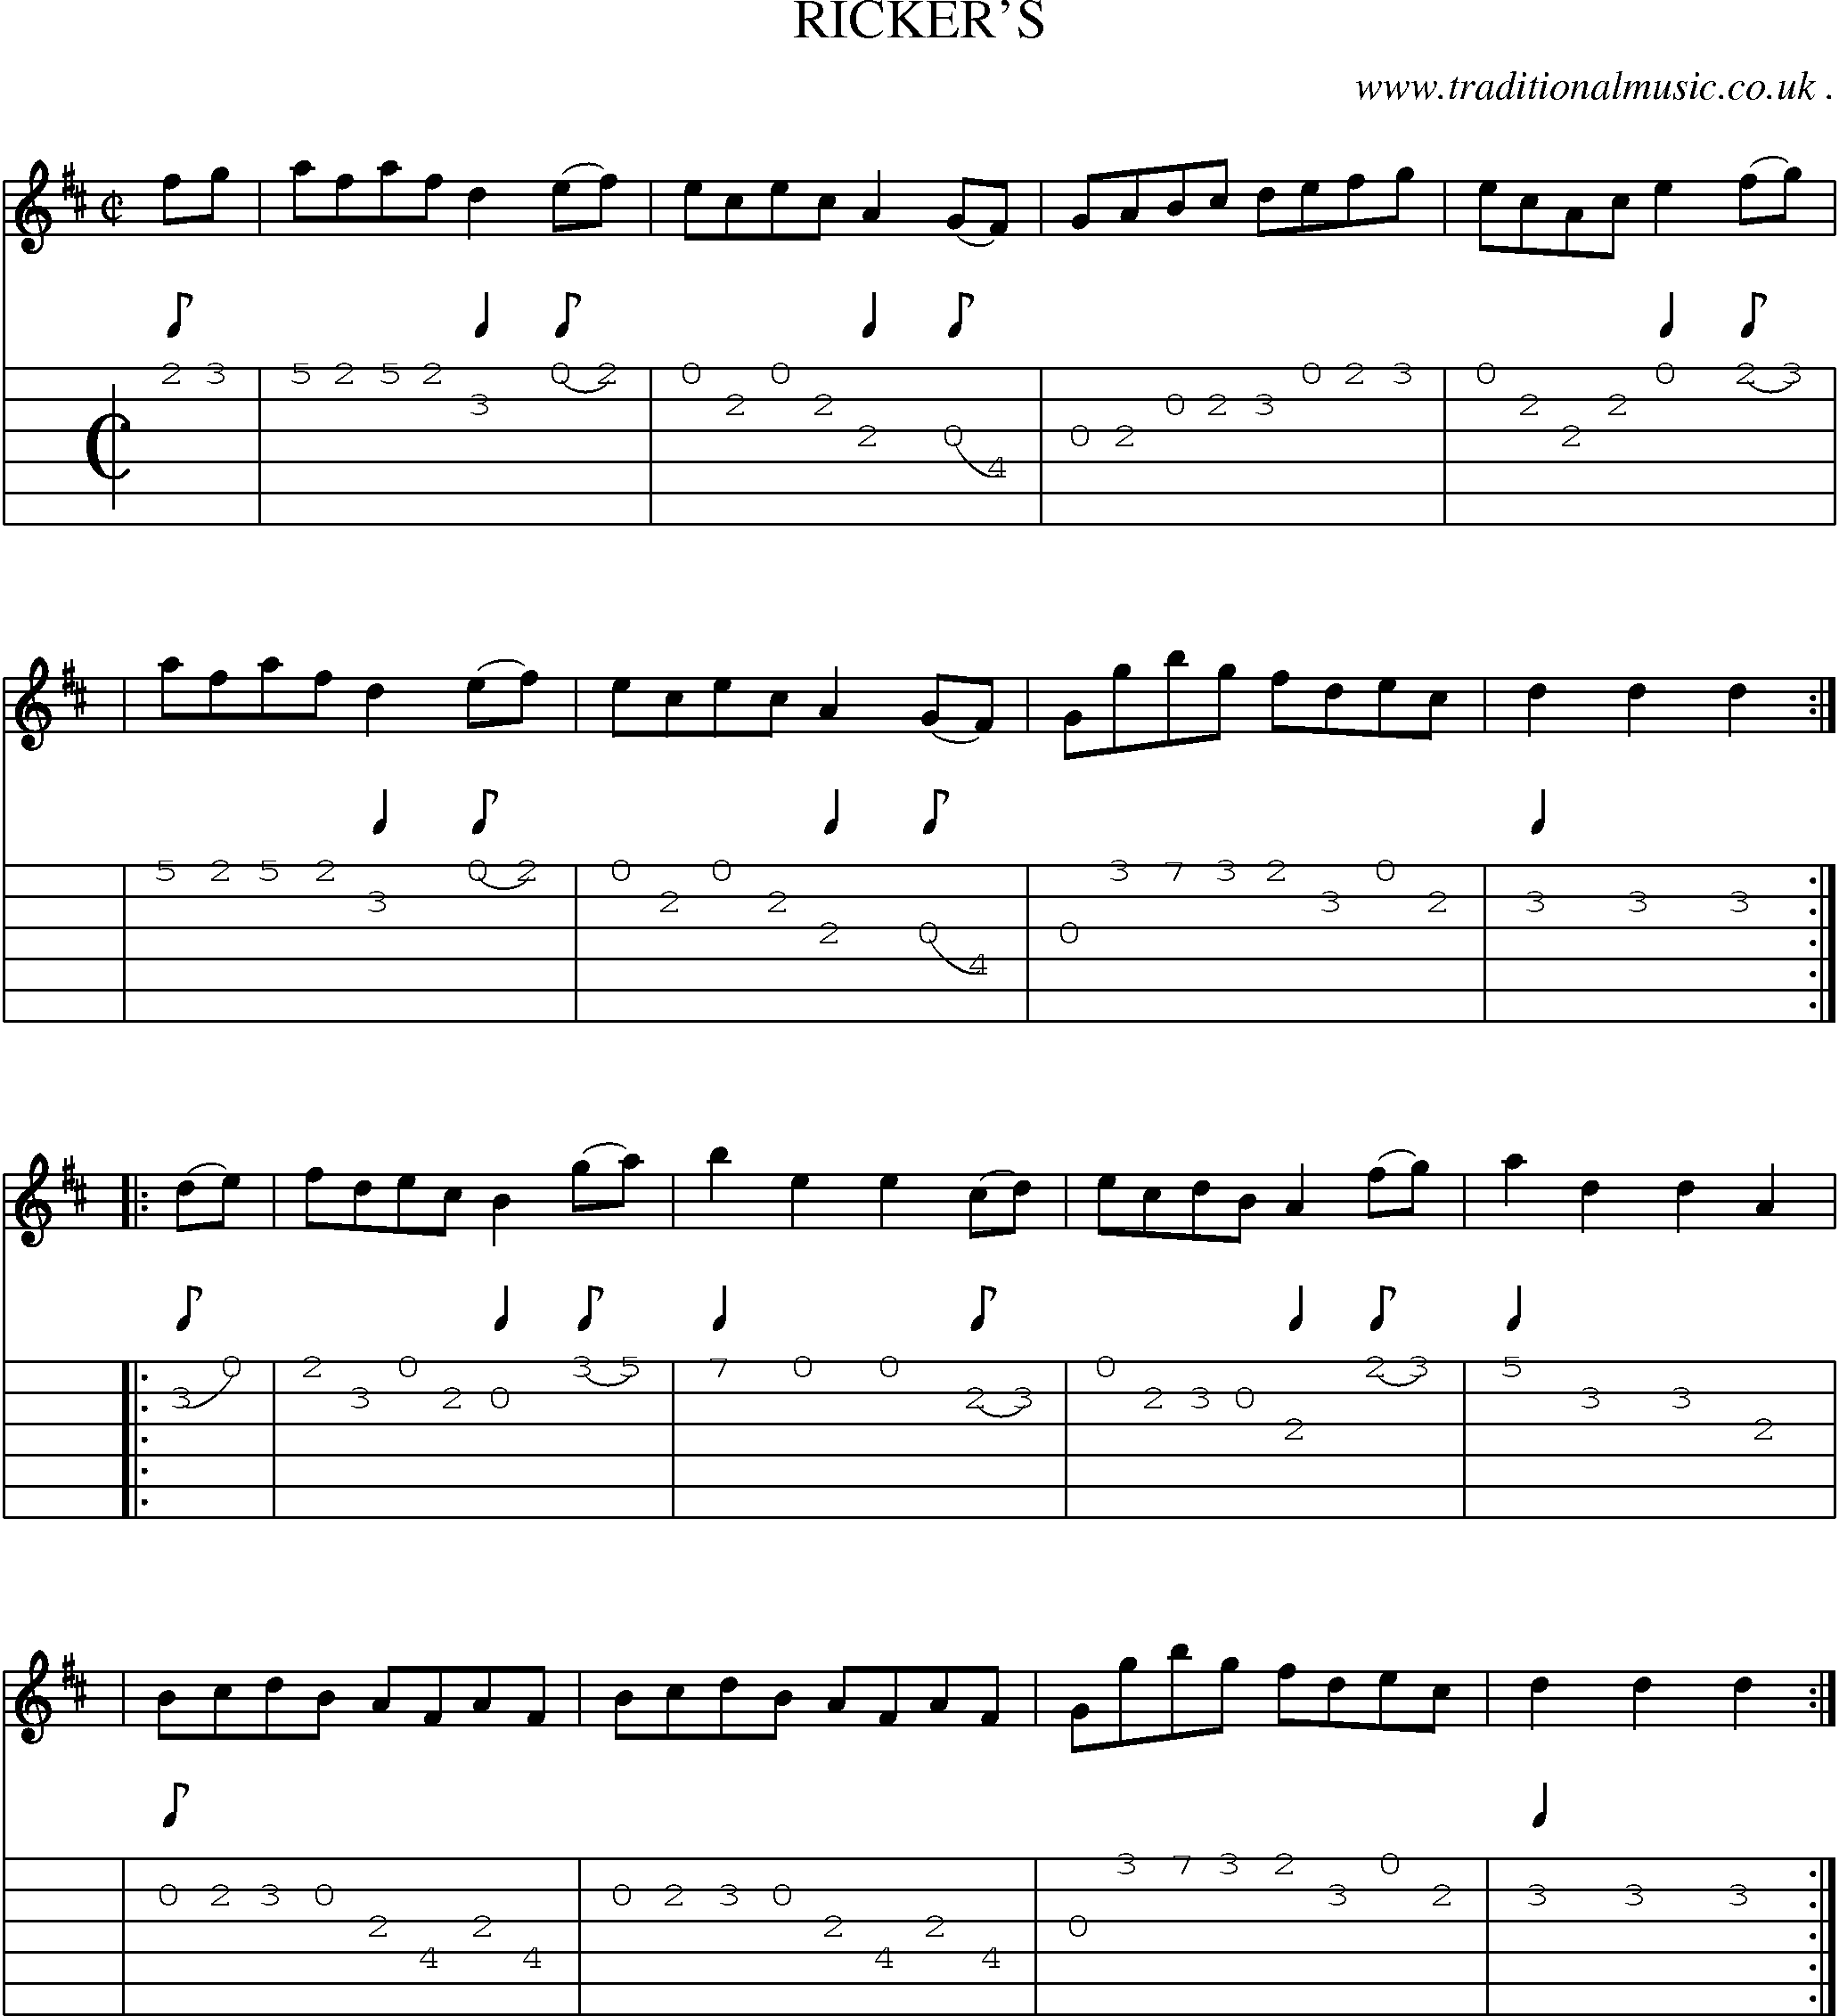 Sheet-Music and Guitar Tabs for Rickers